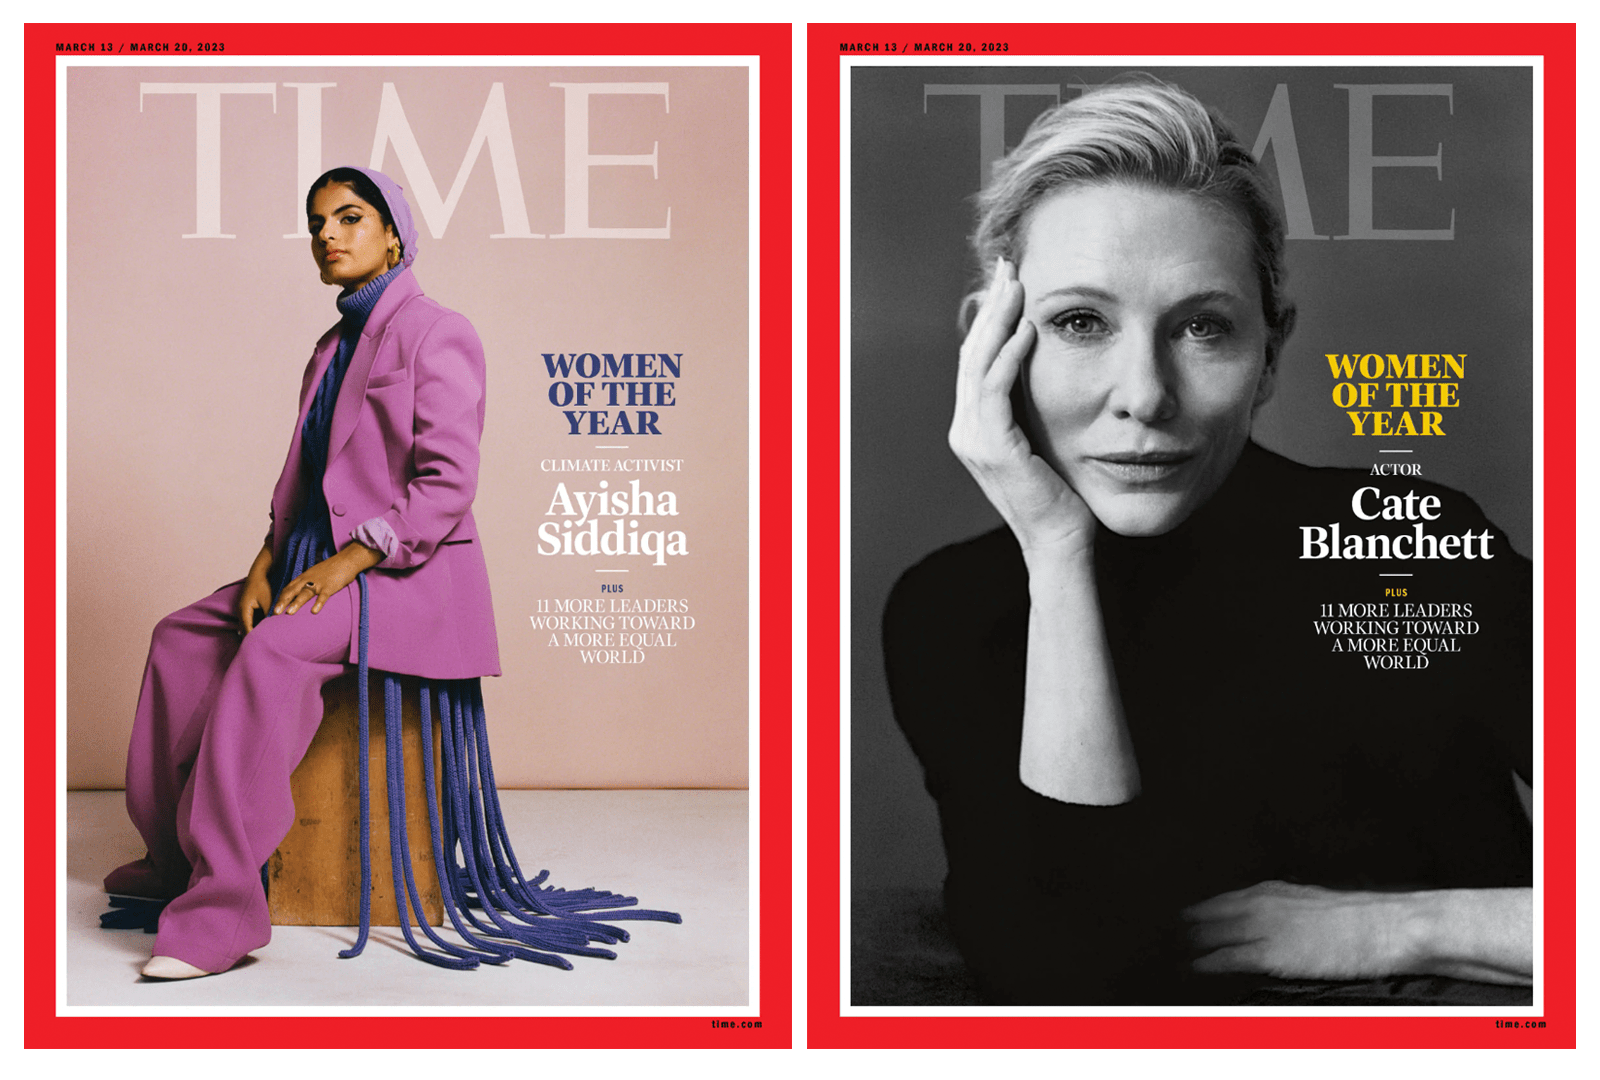 Ayisha Siddiqa and Cate Blanchett appear on the cover for TIME's 2023 Women of the Year list (Photographs by Josefina Santos (Siddiqa) and Yana Yatsuk (Blanchett) for TIME)